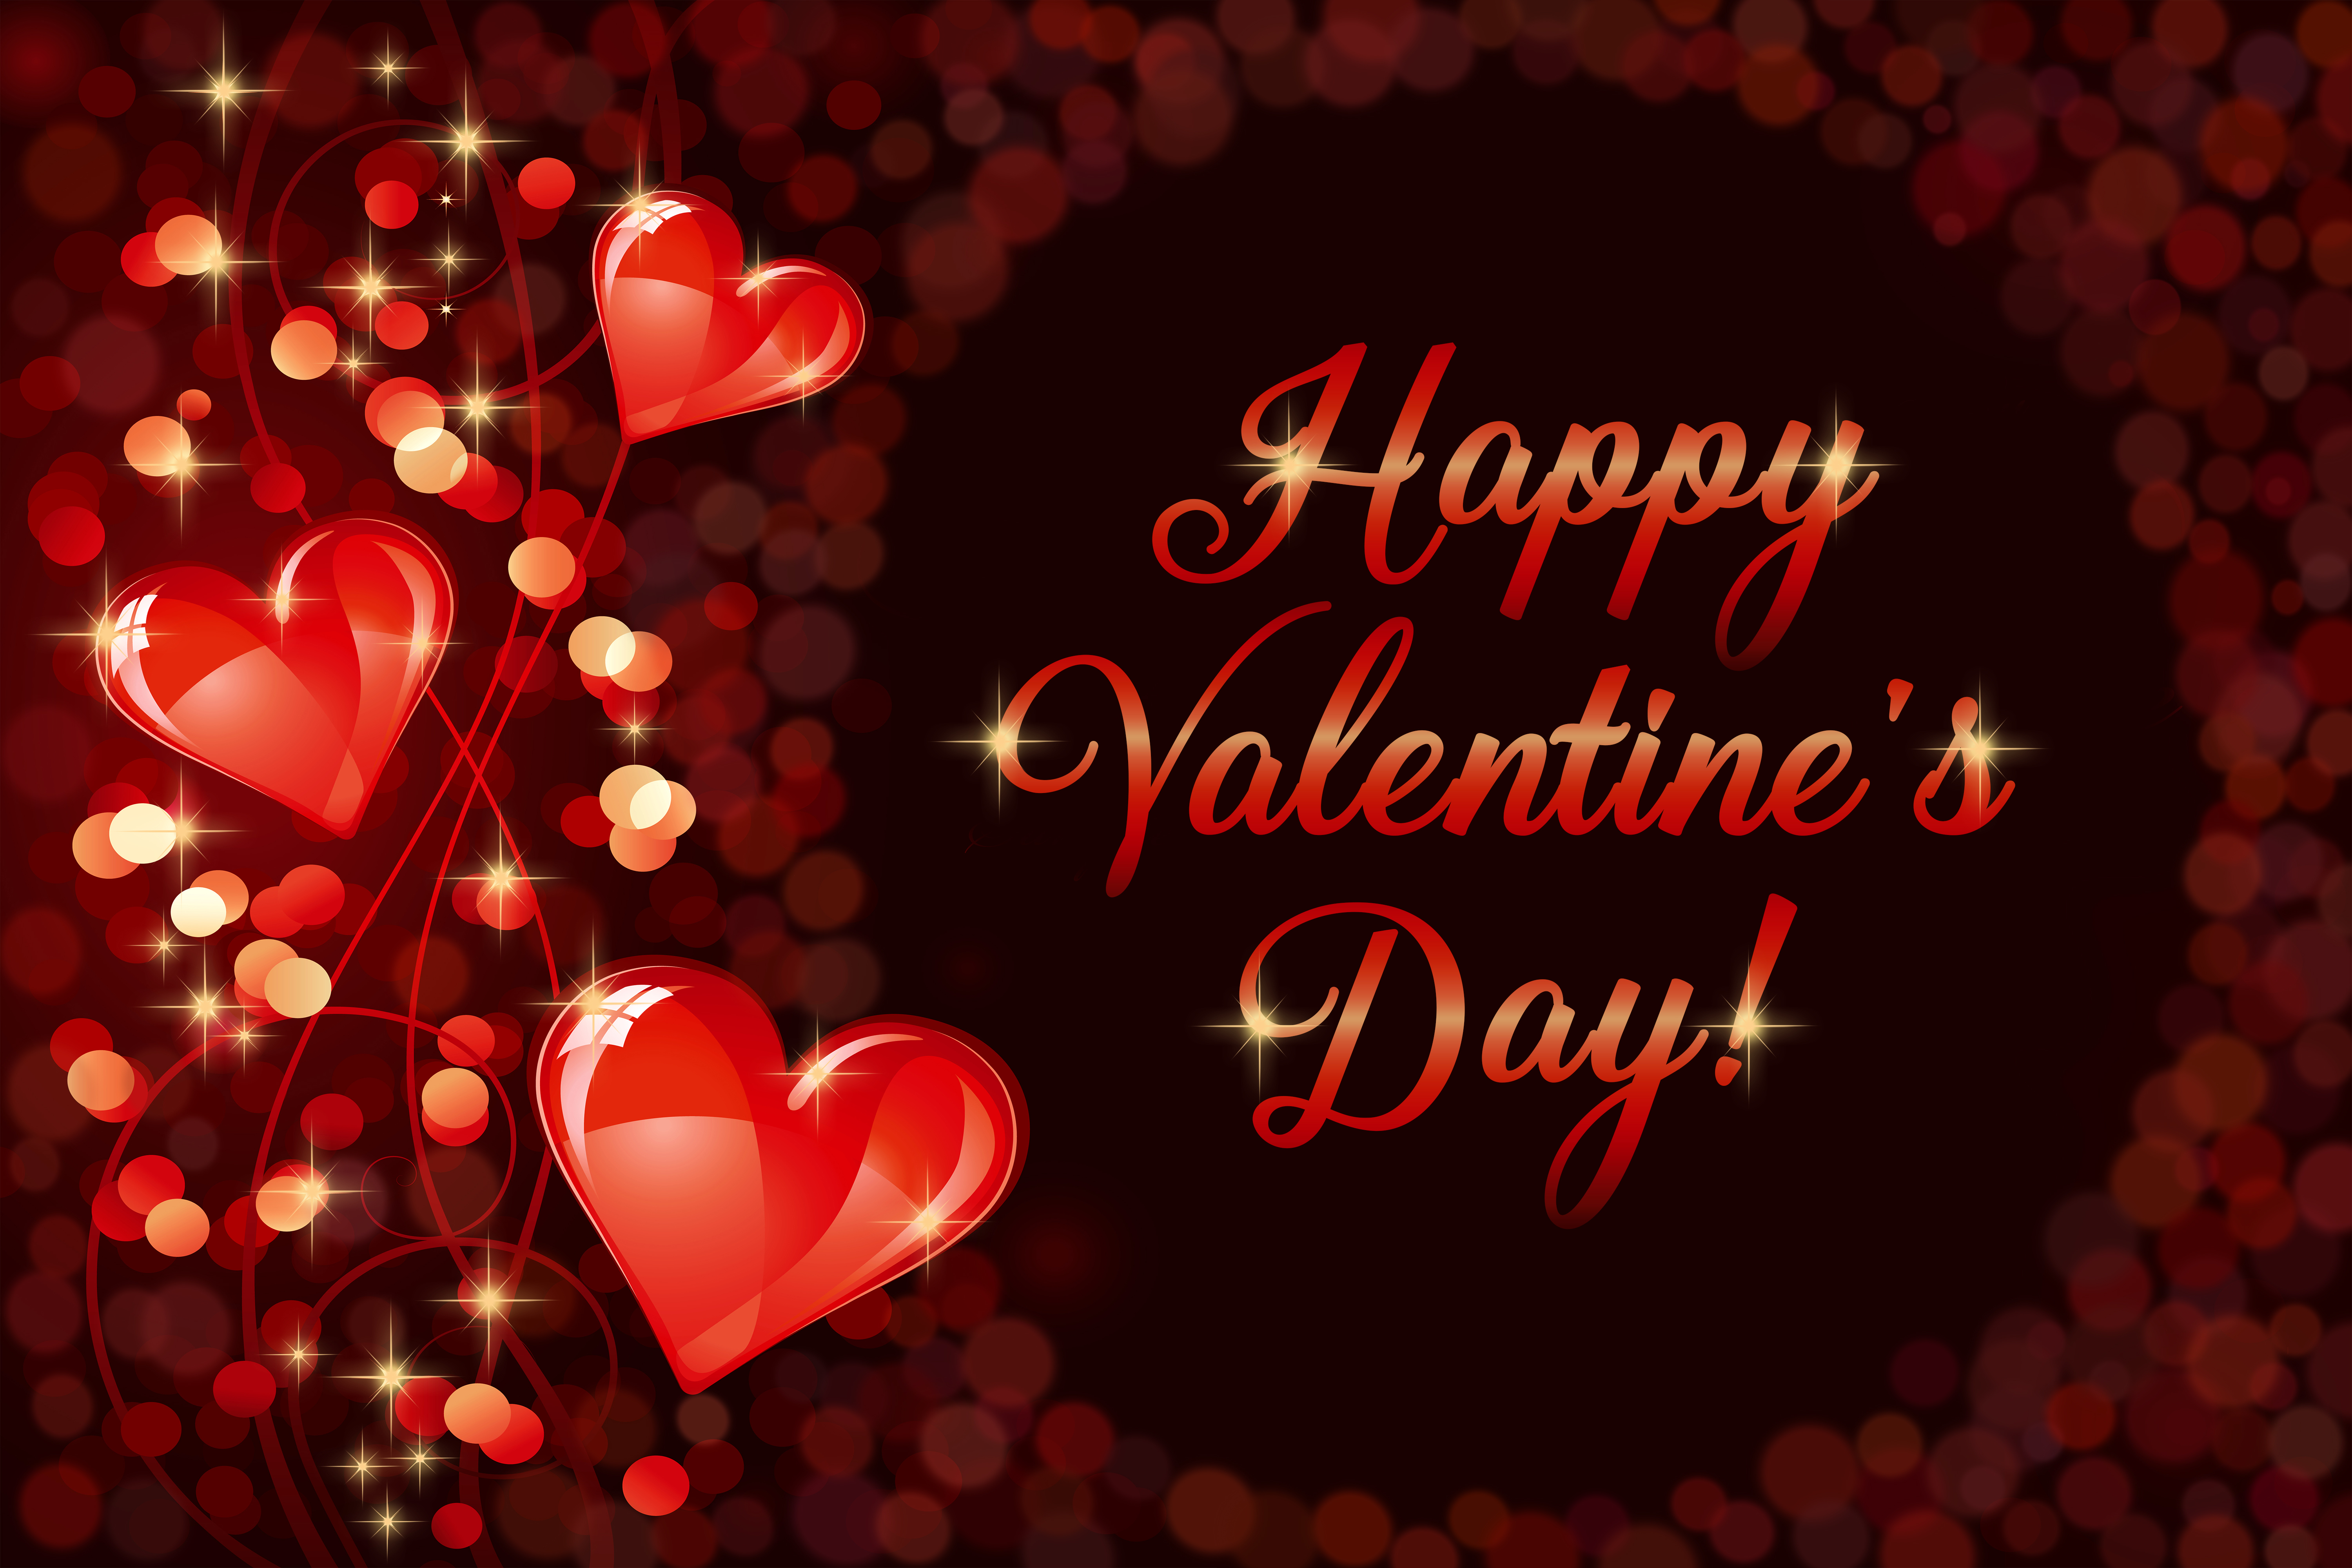 HD desktop wallpaper: Valentine's Day, Love, Holiday, Heart, Romantic, Happy  Valentine's Day download free picture #722696